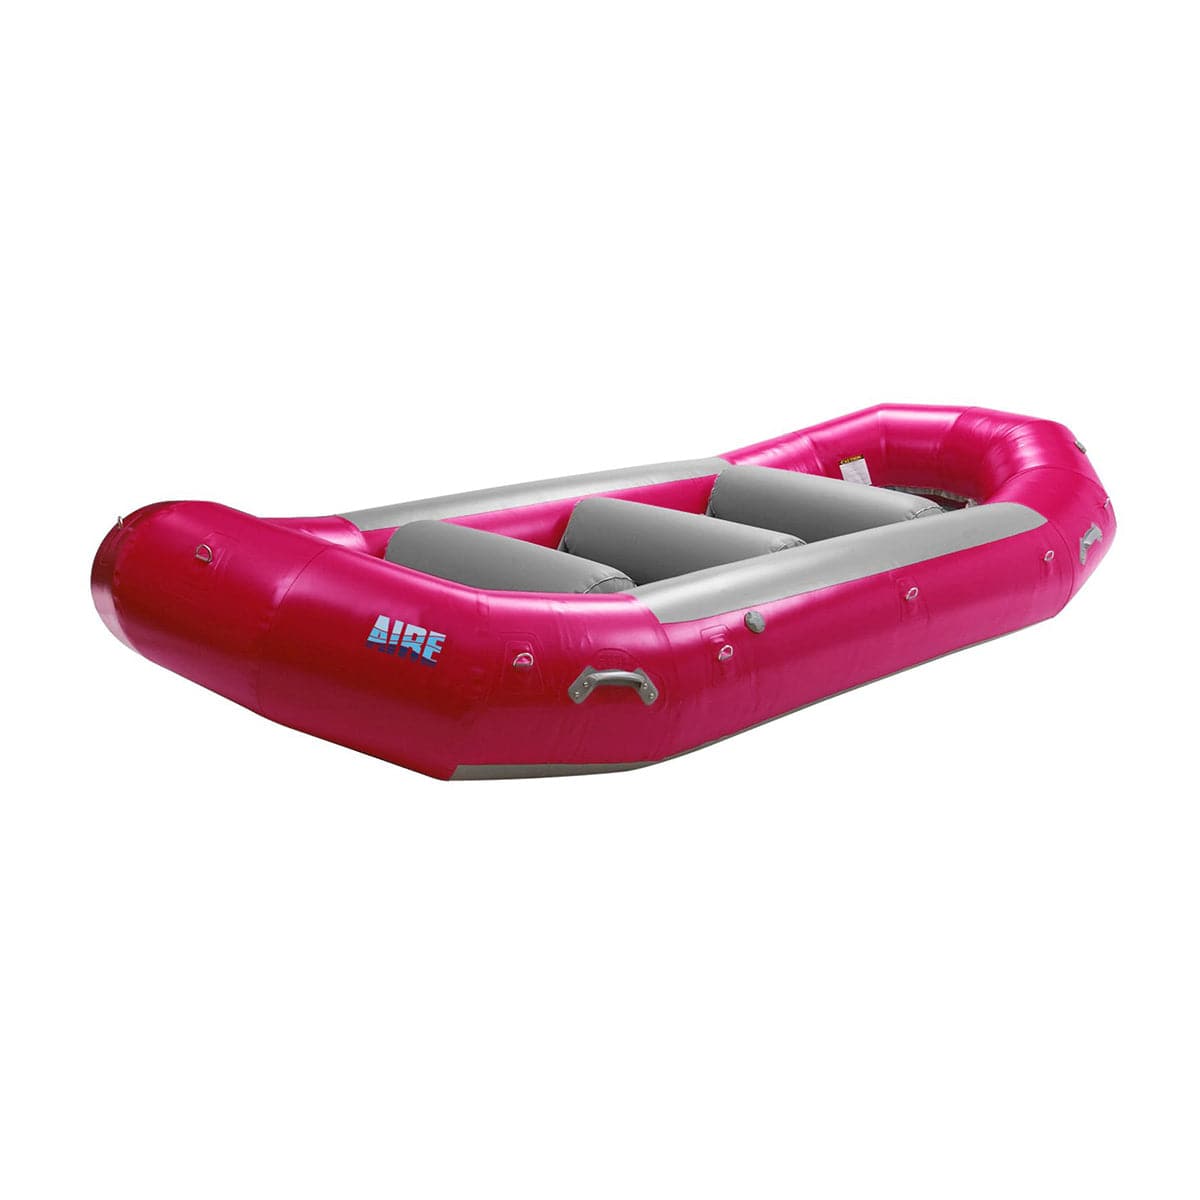 Featuring the R-Series Rafts raft manufactured by AIRE shown here from a tenth angle.